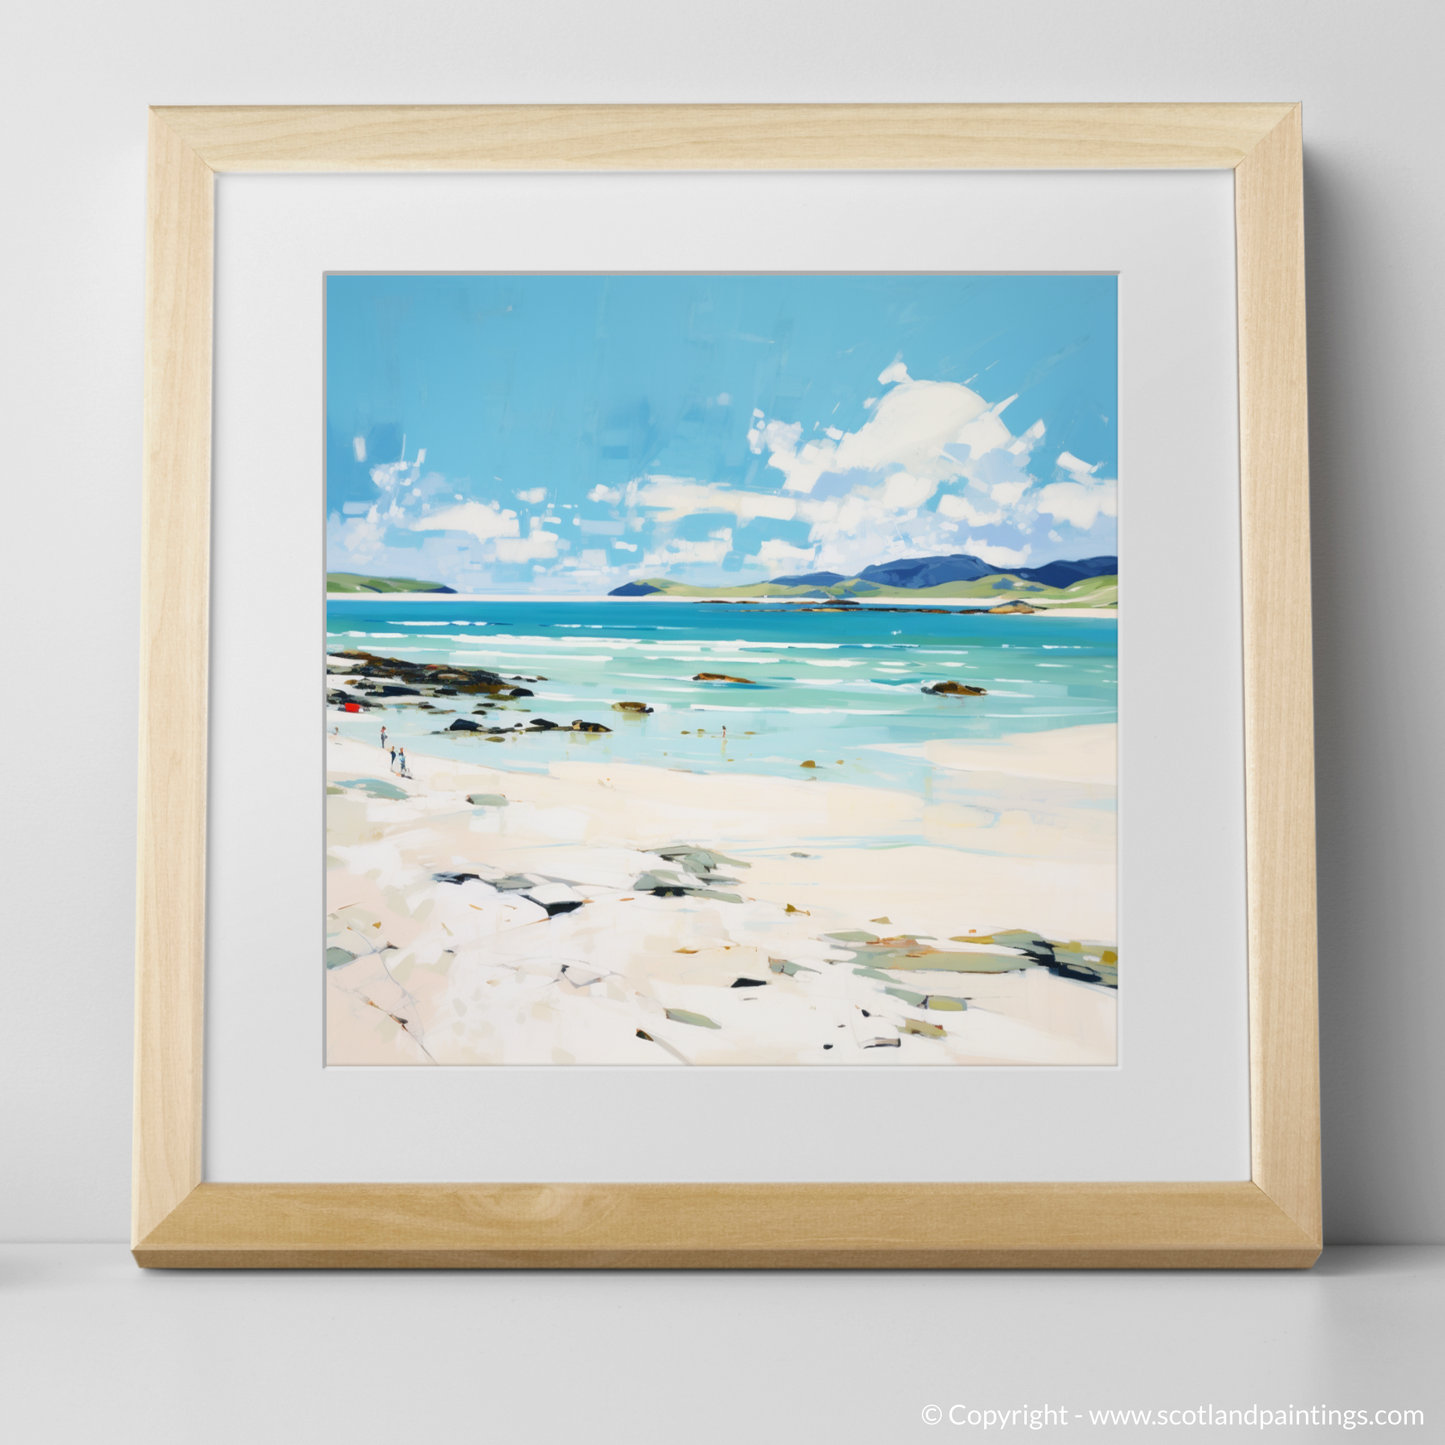 Art Print of Luskentyre Beach, Isle of Harris in summer with a natural frame